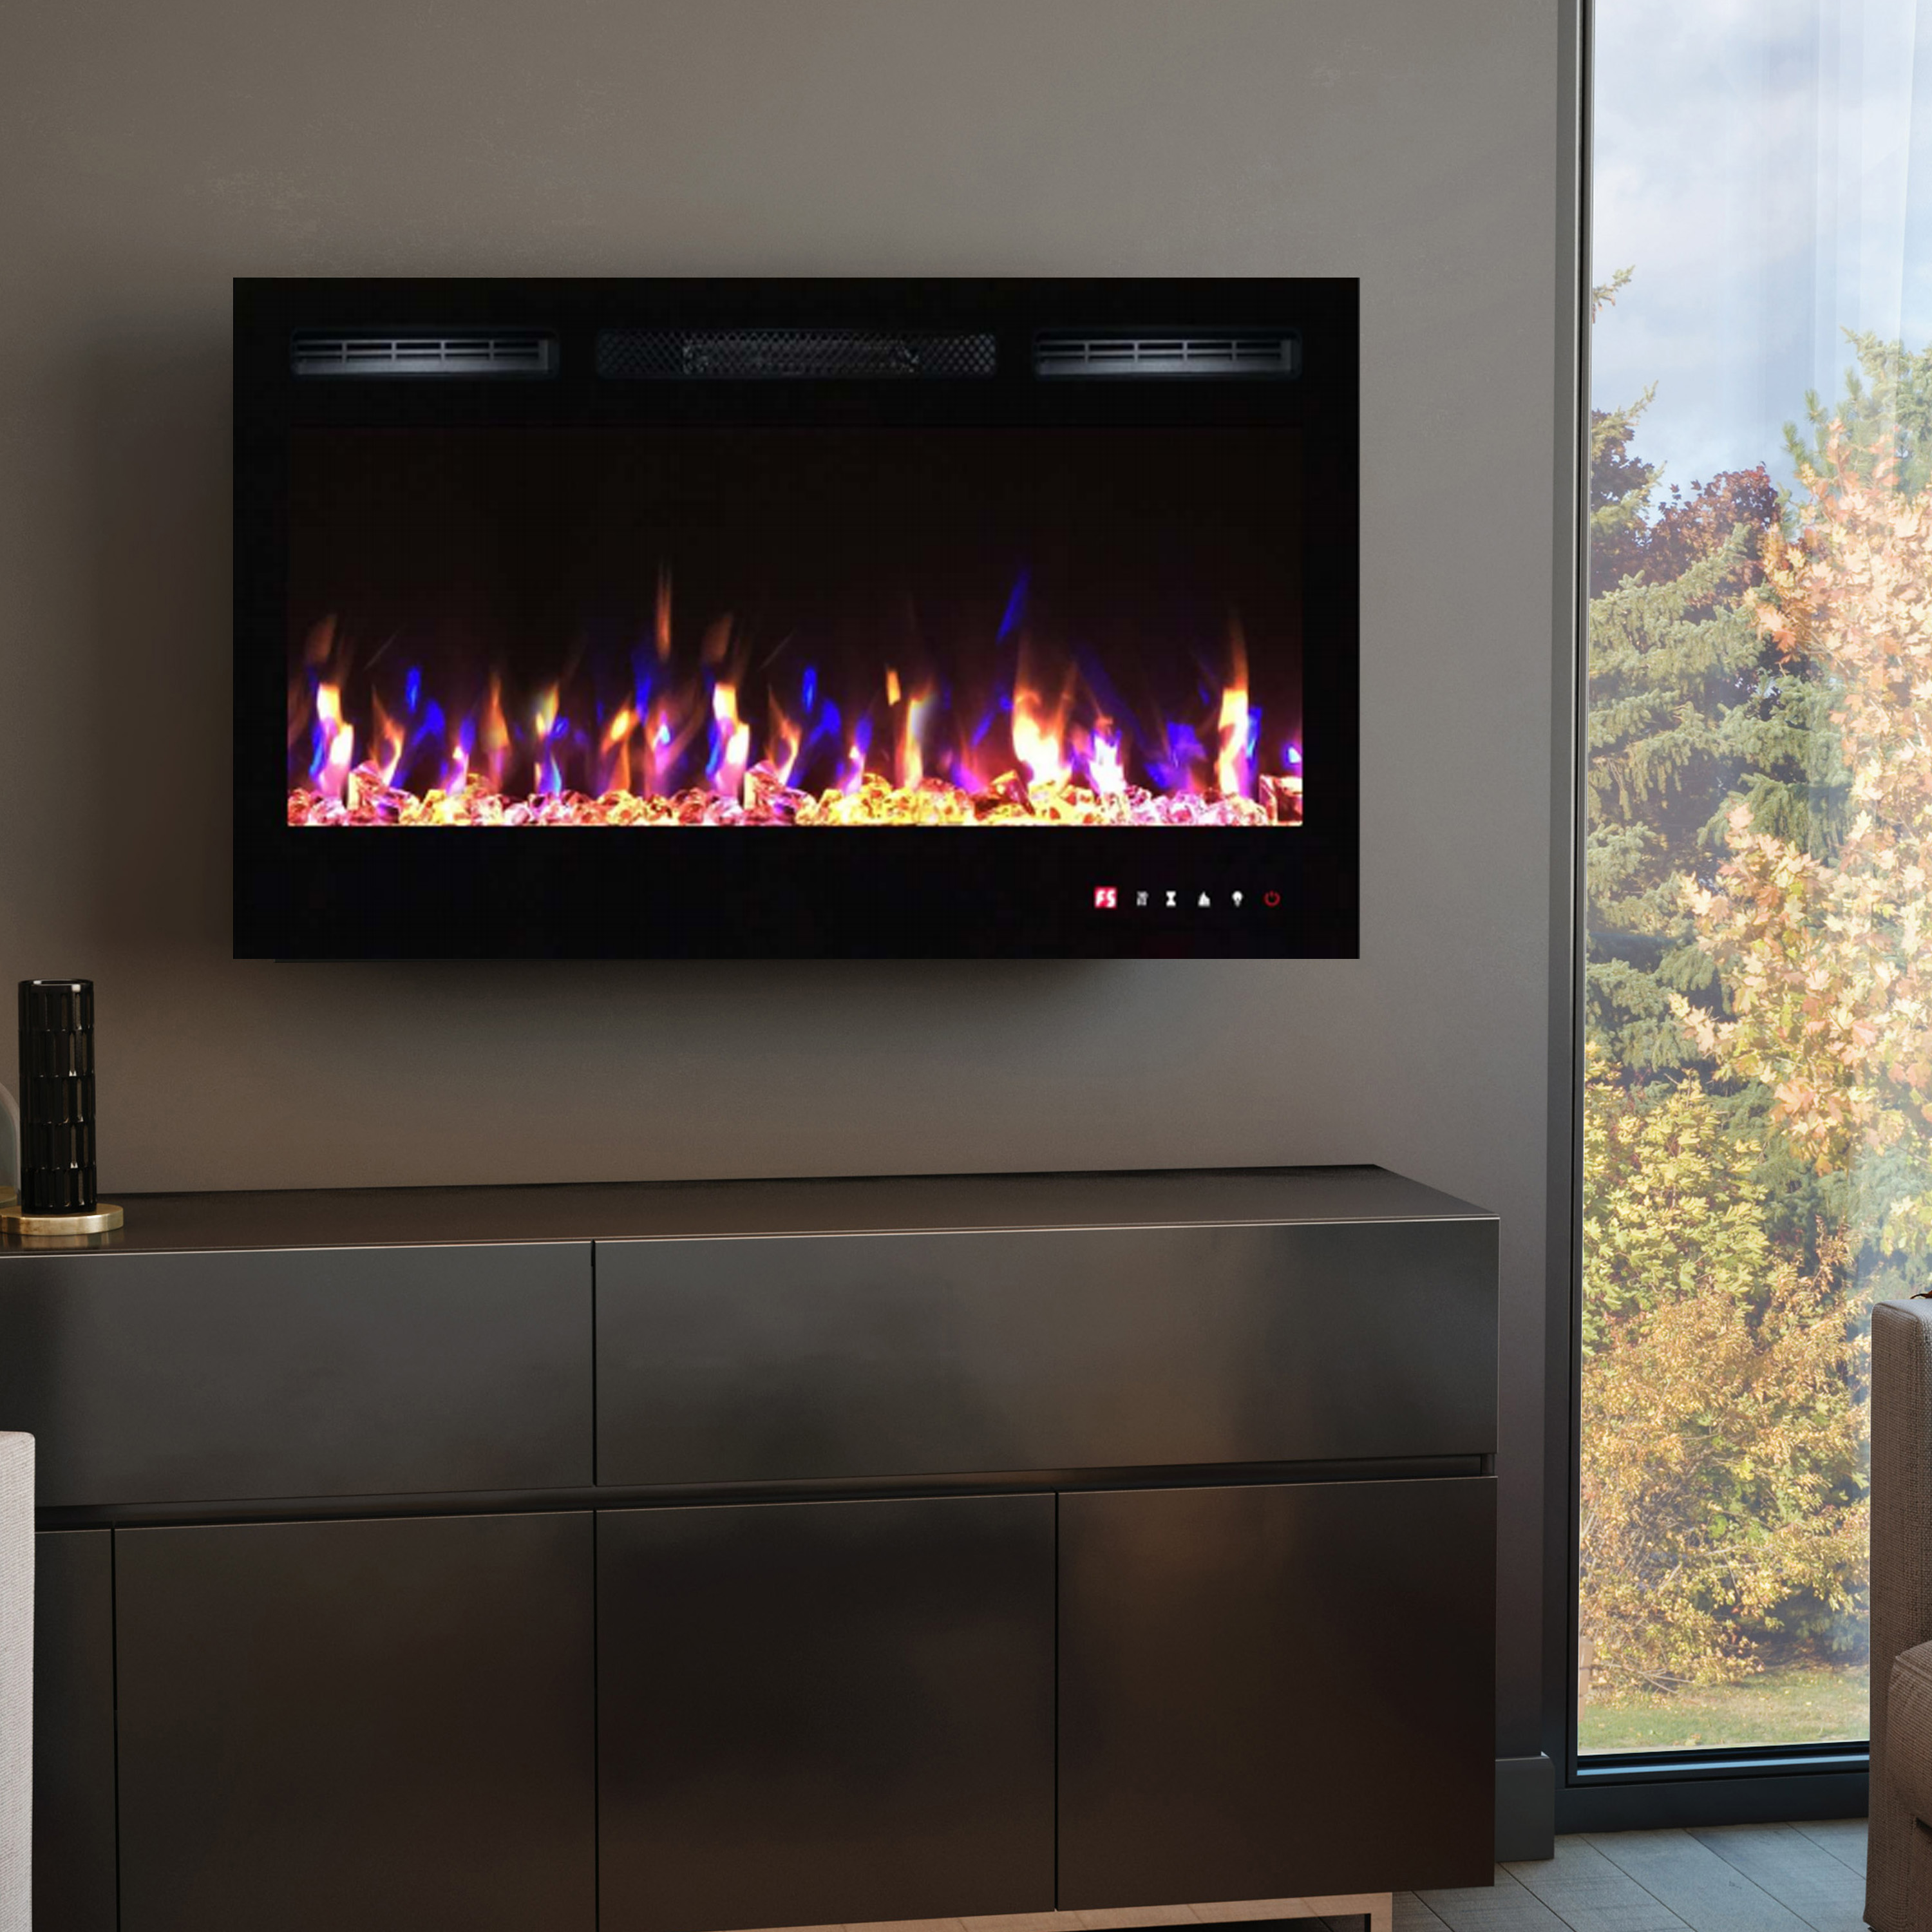 2019 New Premium Product 26inch Black Wall Mounted Electric Fire with 3 Colour Flames and can be Inserted ! Pebbles, Logs and Crystals